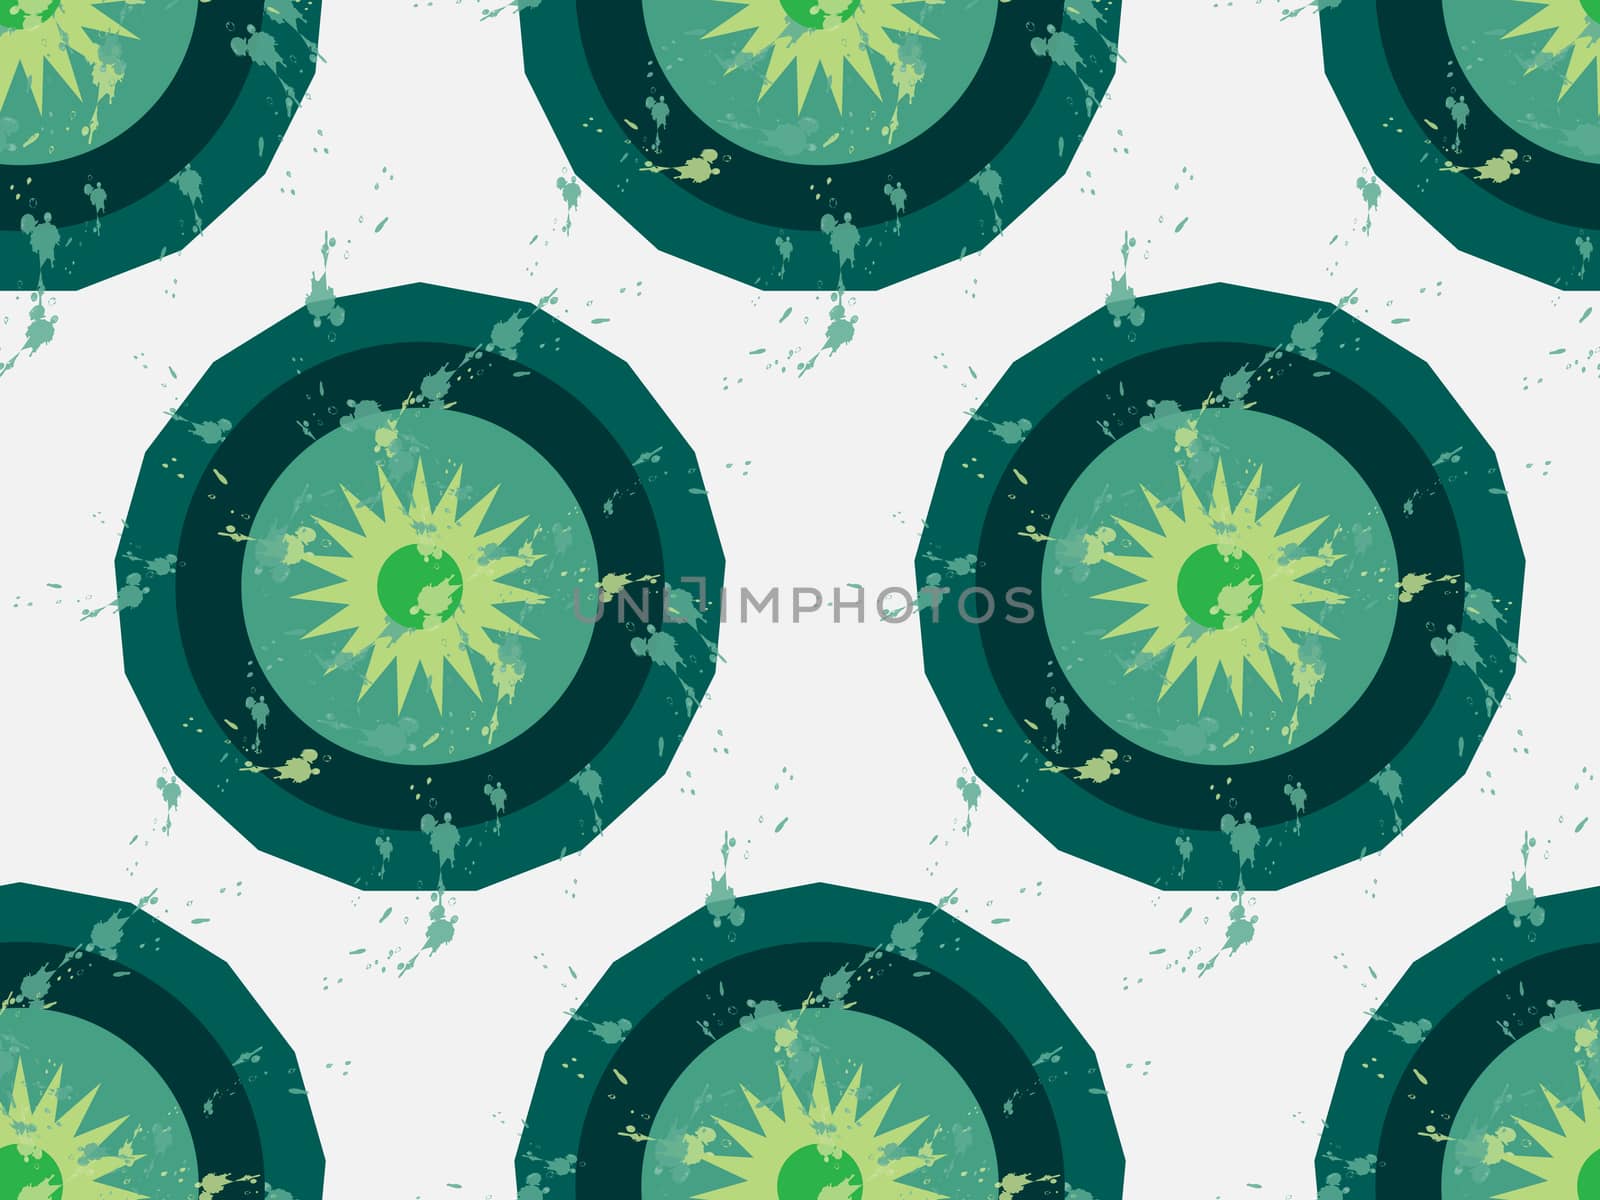 Grunge colorful holiday abstract geometric seamless pattern with stars. Vector